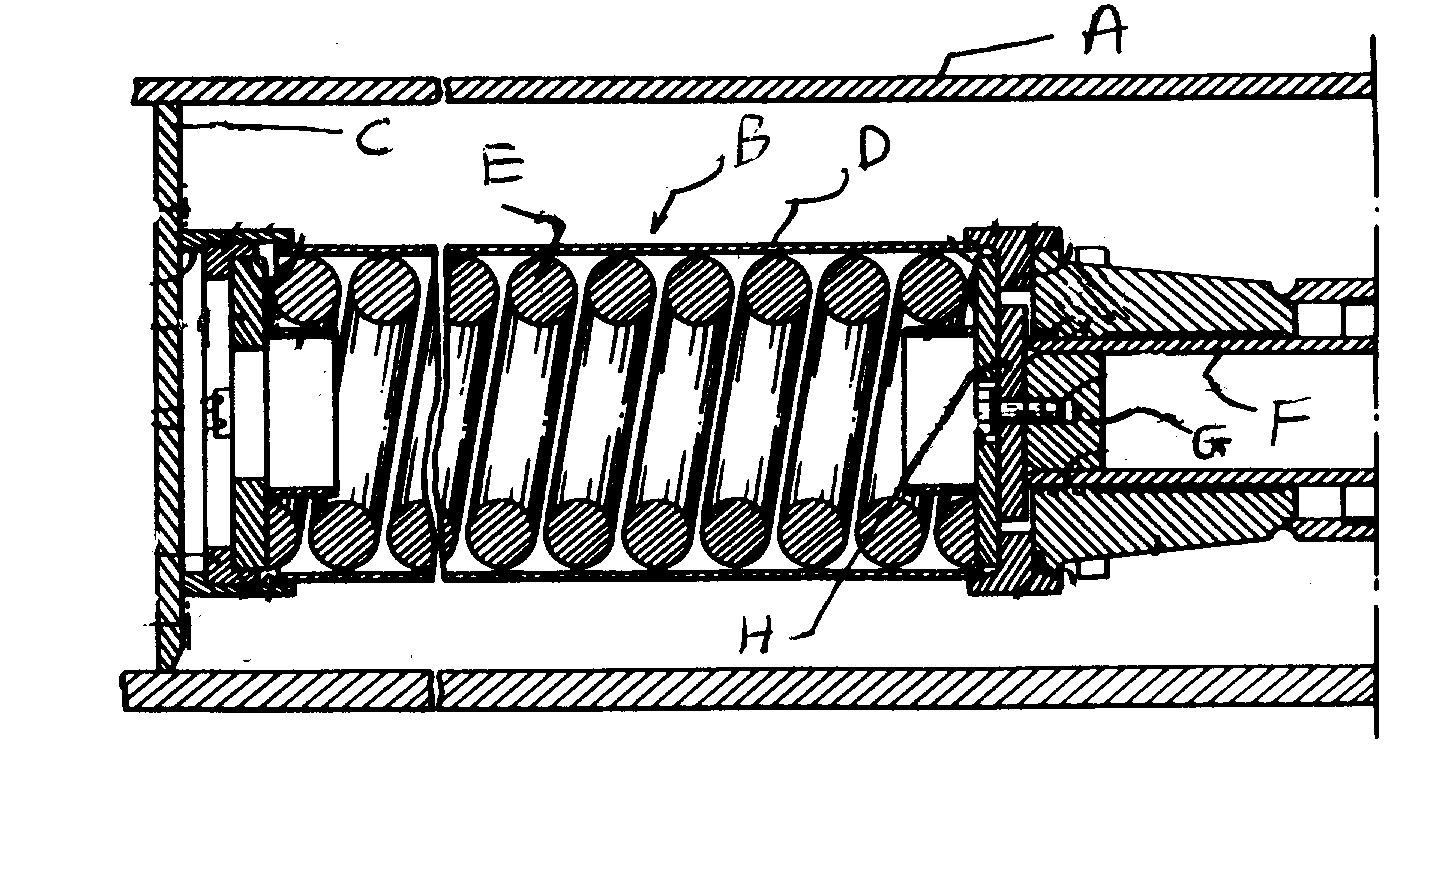 A - Track roller frame; B - Spring recoil assembly; C - Stop;D - Housing; E - Coil spring; F - Movable piston; G - Block closespiston at one end; H - Circular plate secured to piston block; (Shiftingpiston to the left compresses the coil spring)
